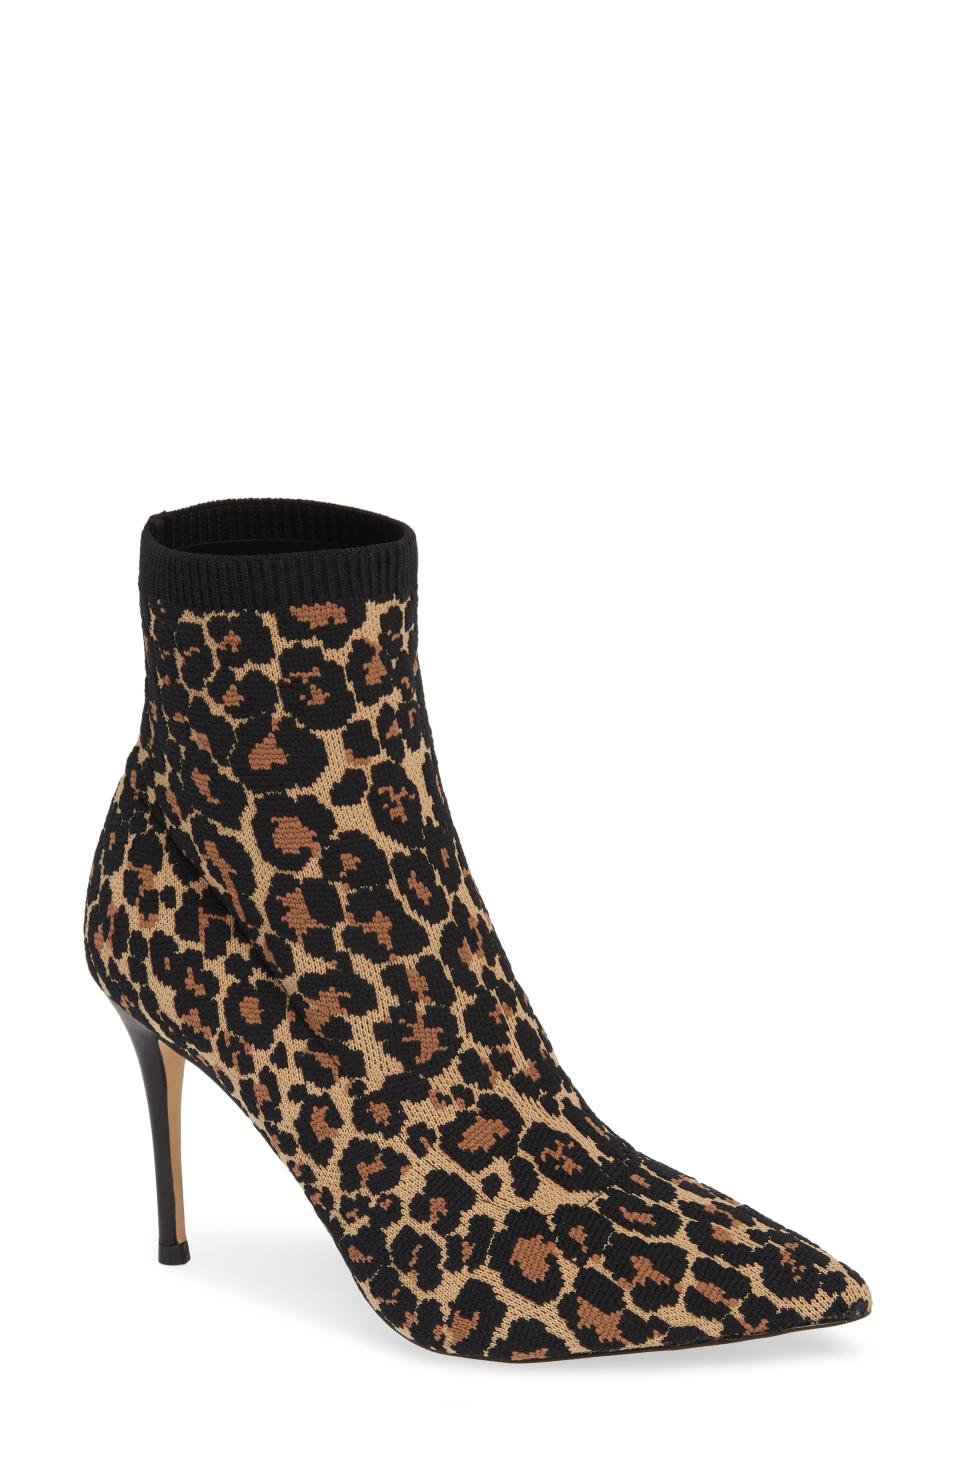 10) An Eye-Catching Pair of Leopard-Printed Shoes